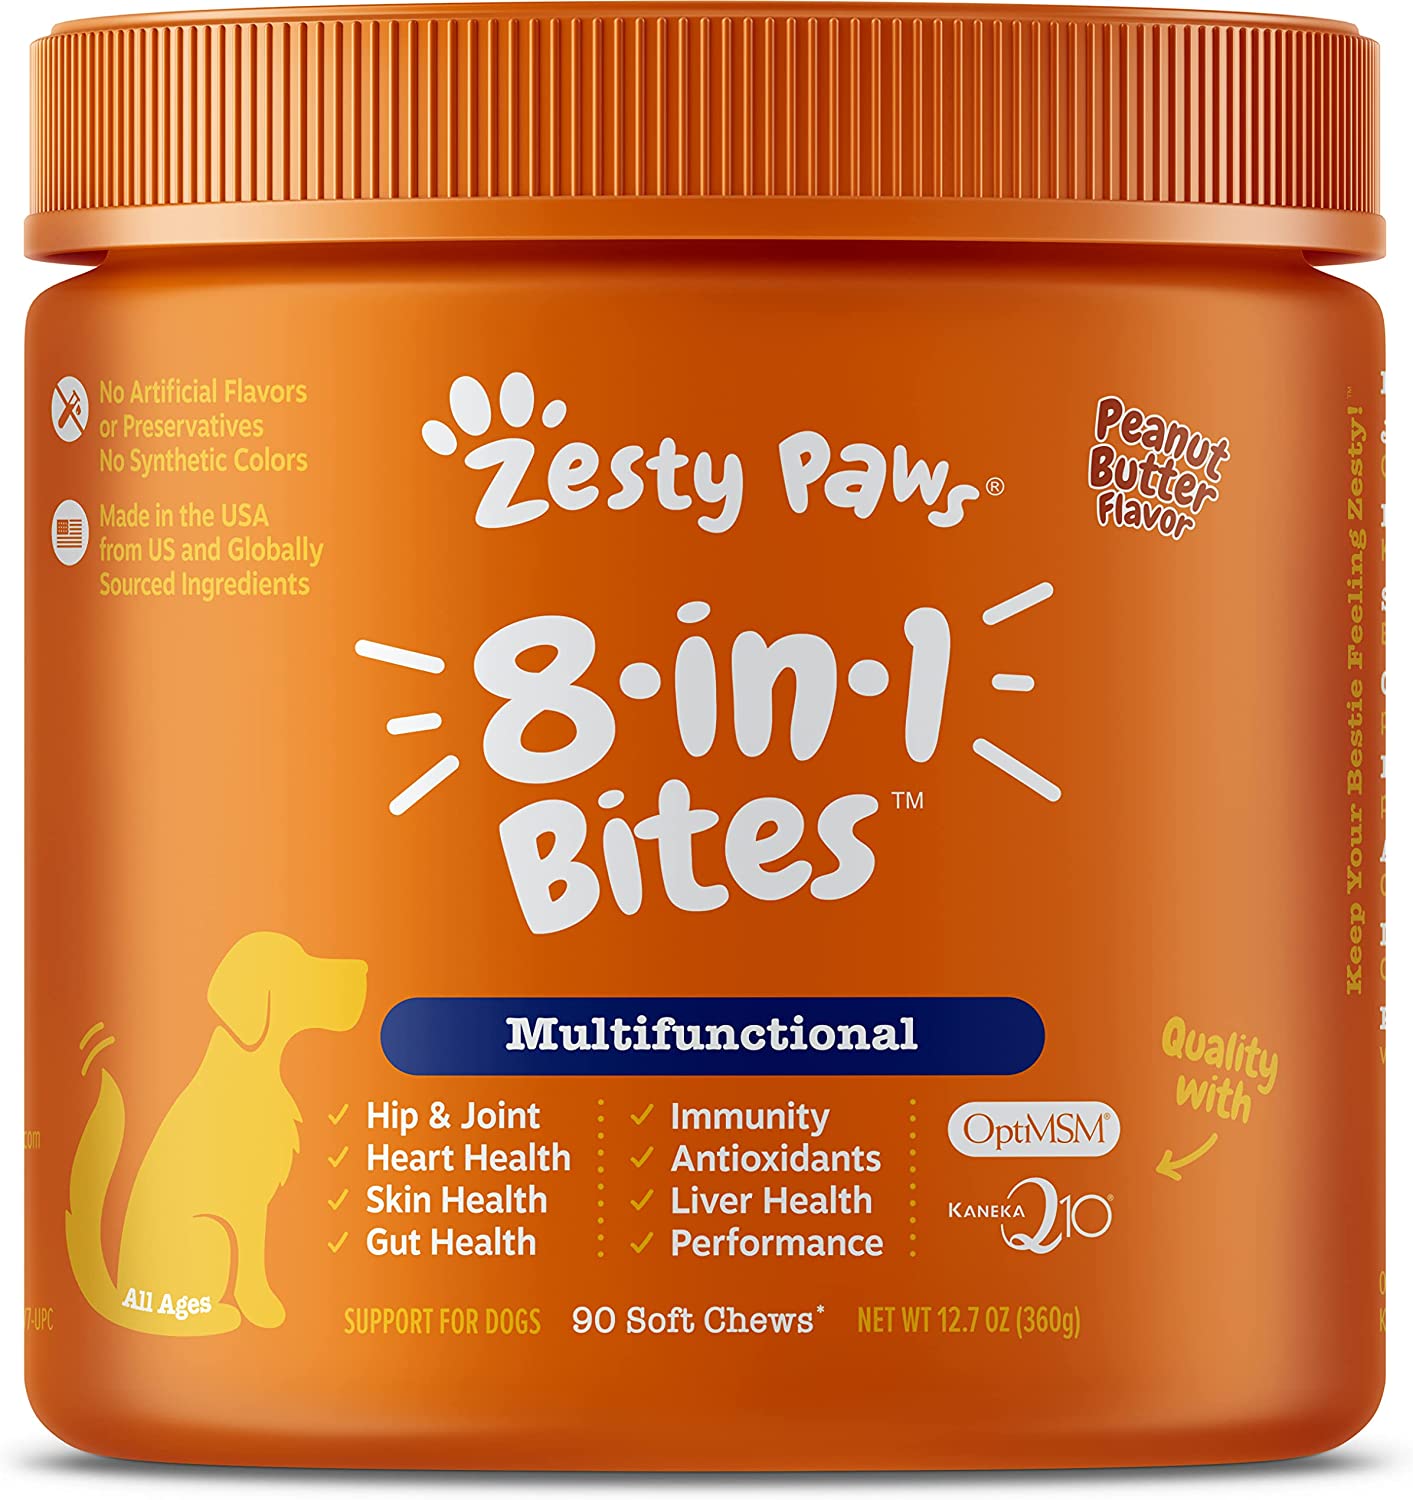 Zesty Paws Core Elements 8-in-1 Chews Multivitamin for Dogs